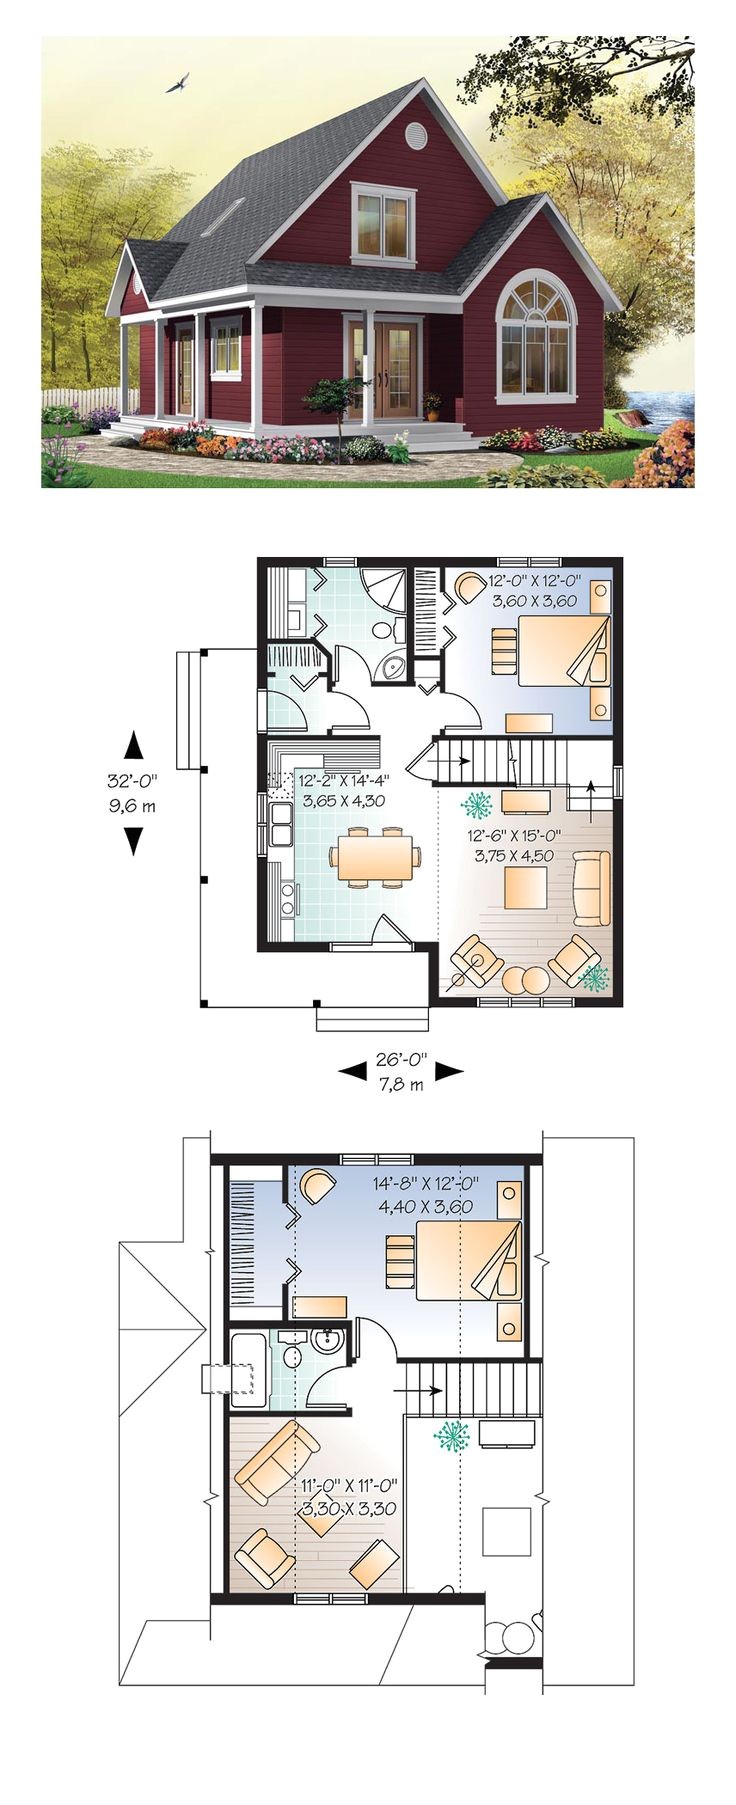 Small Home Design Plans Best 25 Small Homes Ideas On Pinterest Small Home Plans